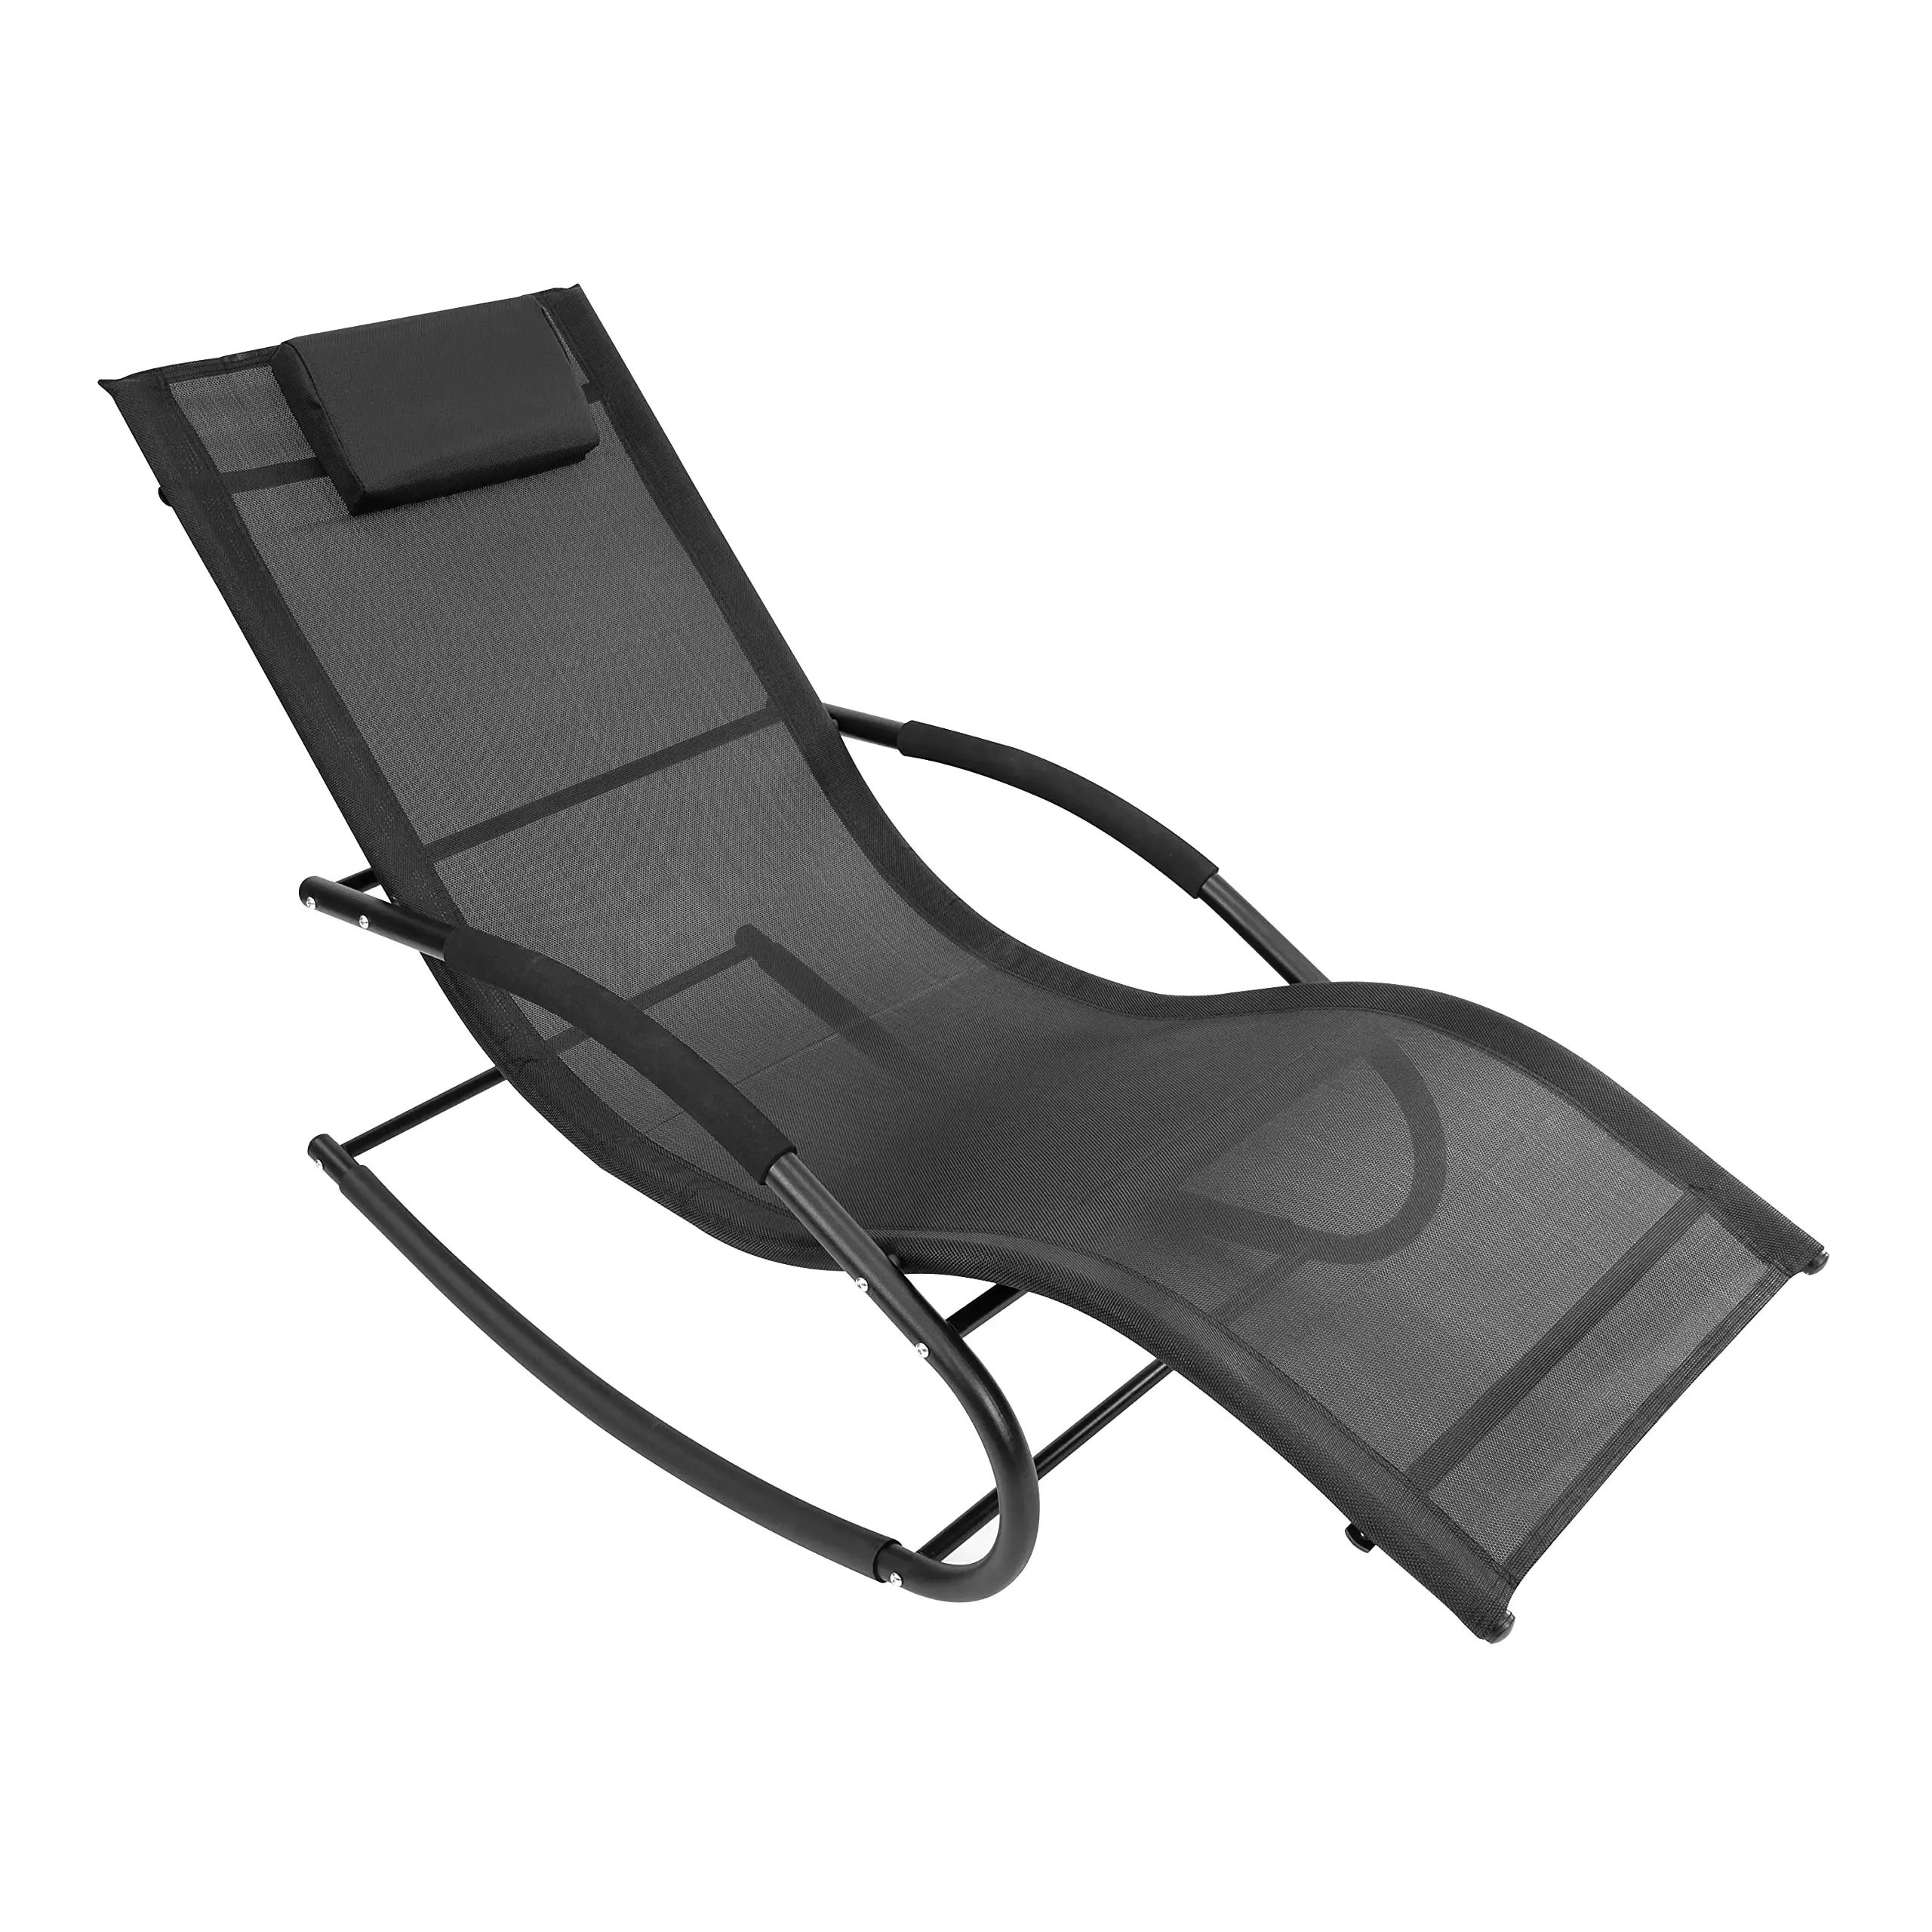 Garden Modern Patio Outdoor Rocking Pool Chair Sun Lounger Beach Swimming Pool Lounger for Pool Side